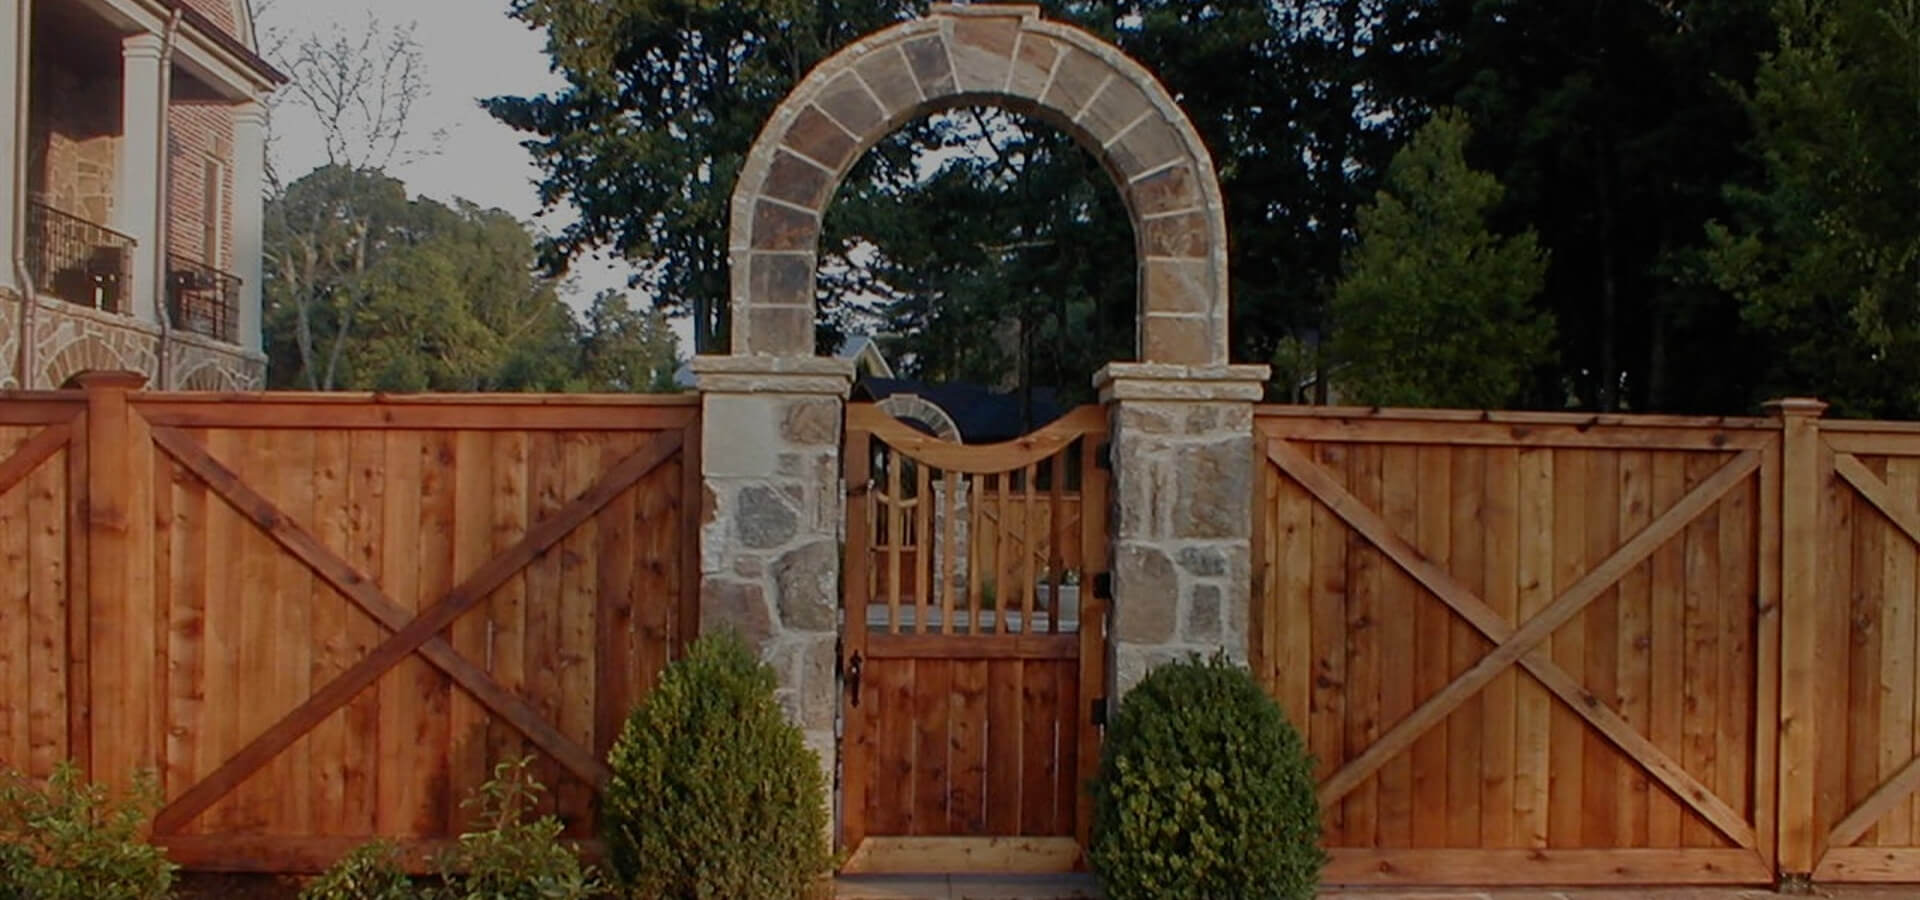 Wooden gate with brick archway